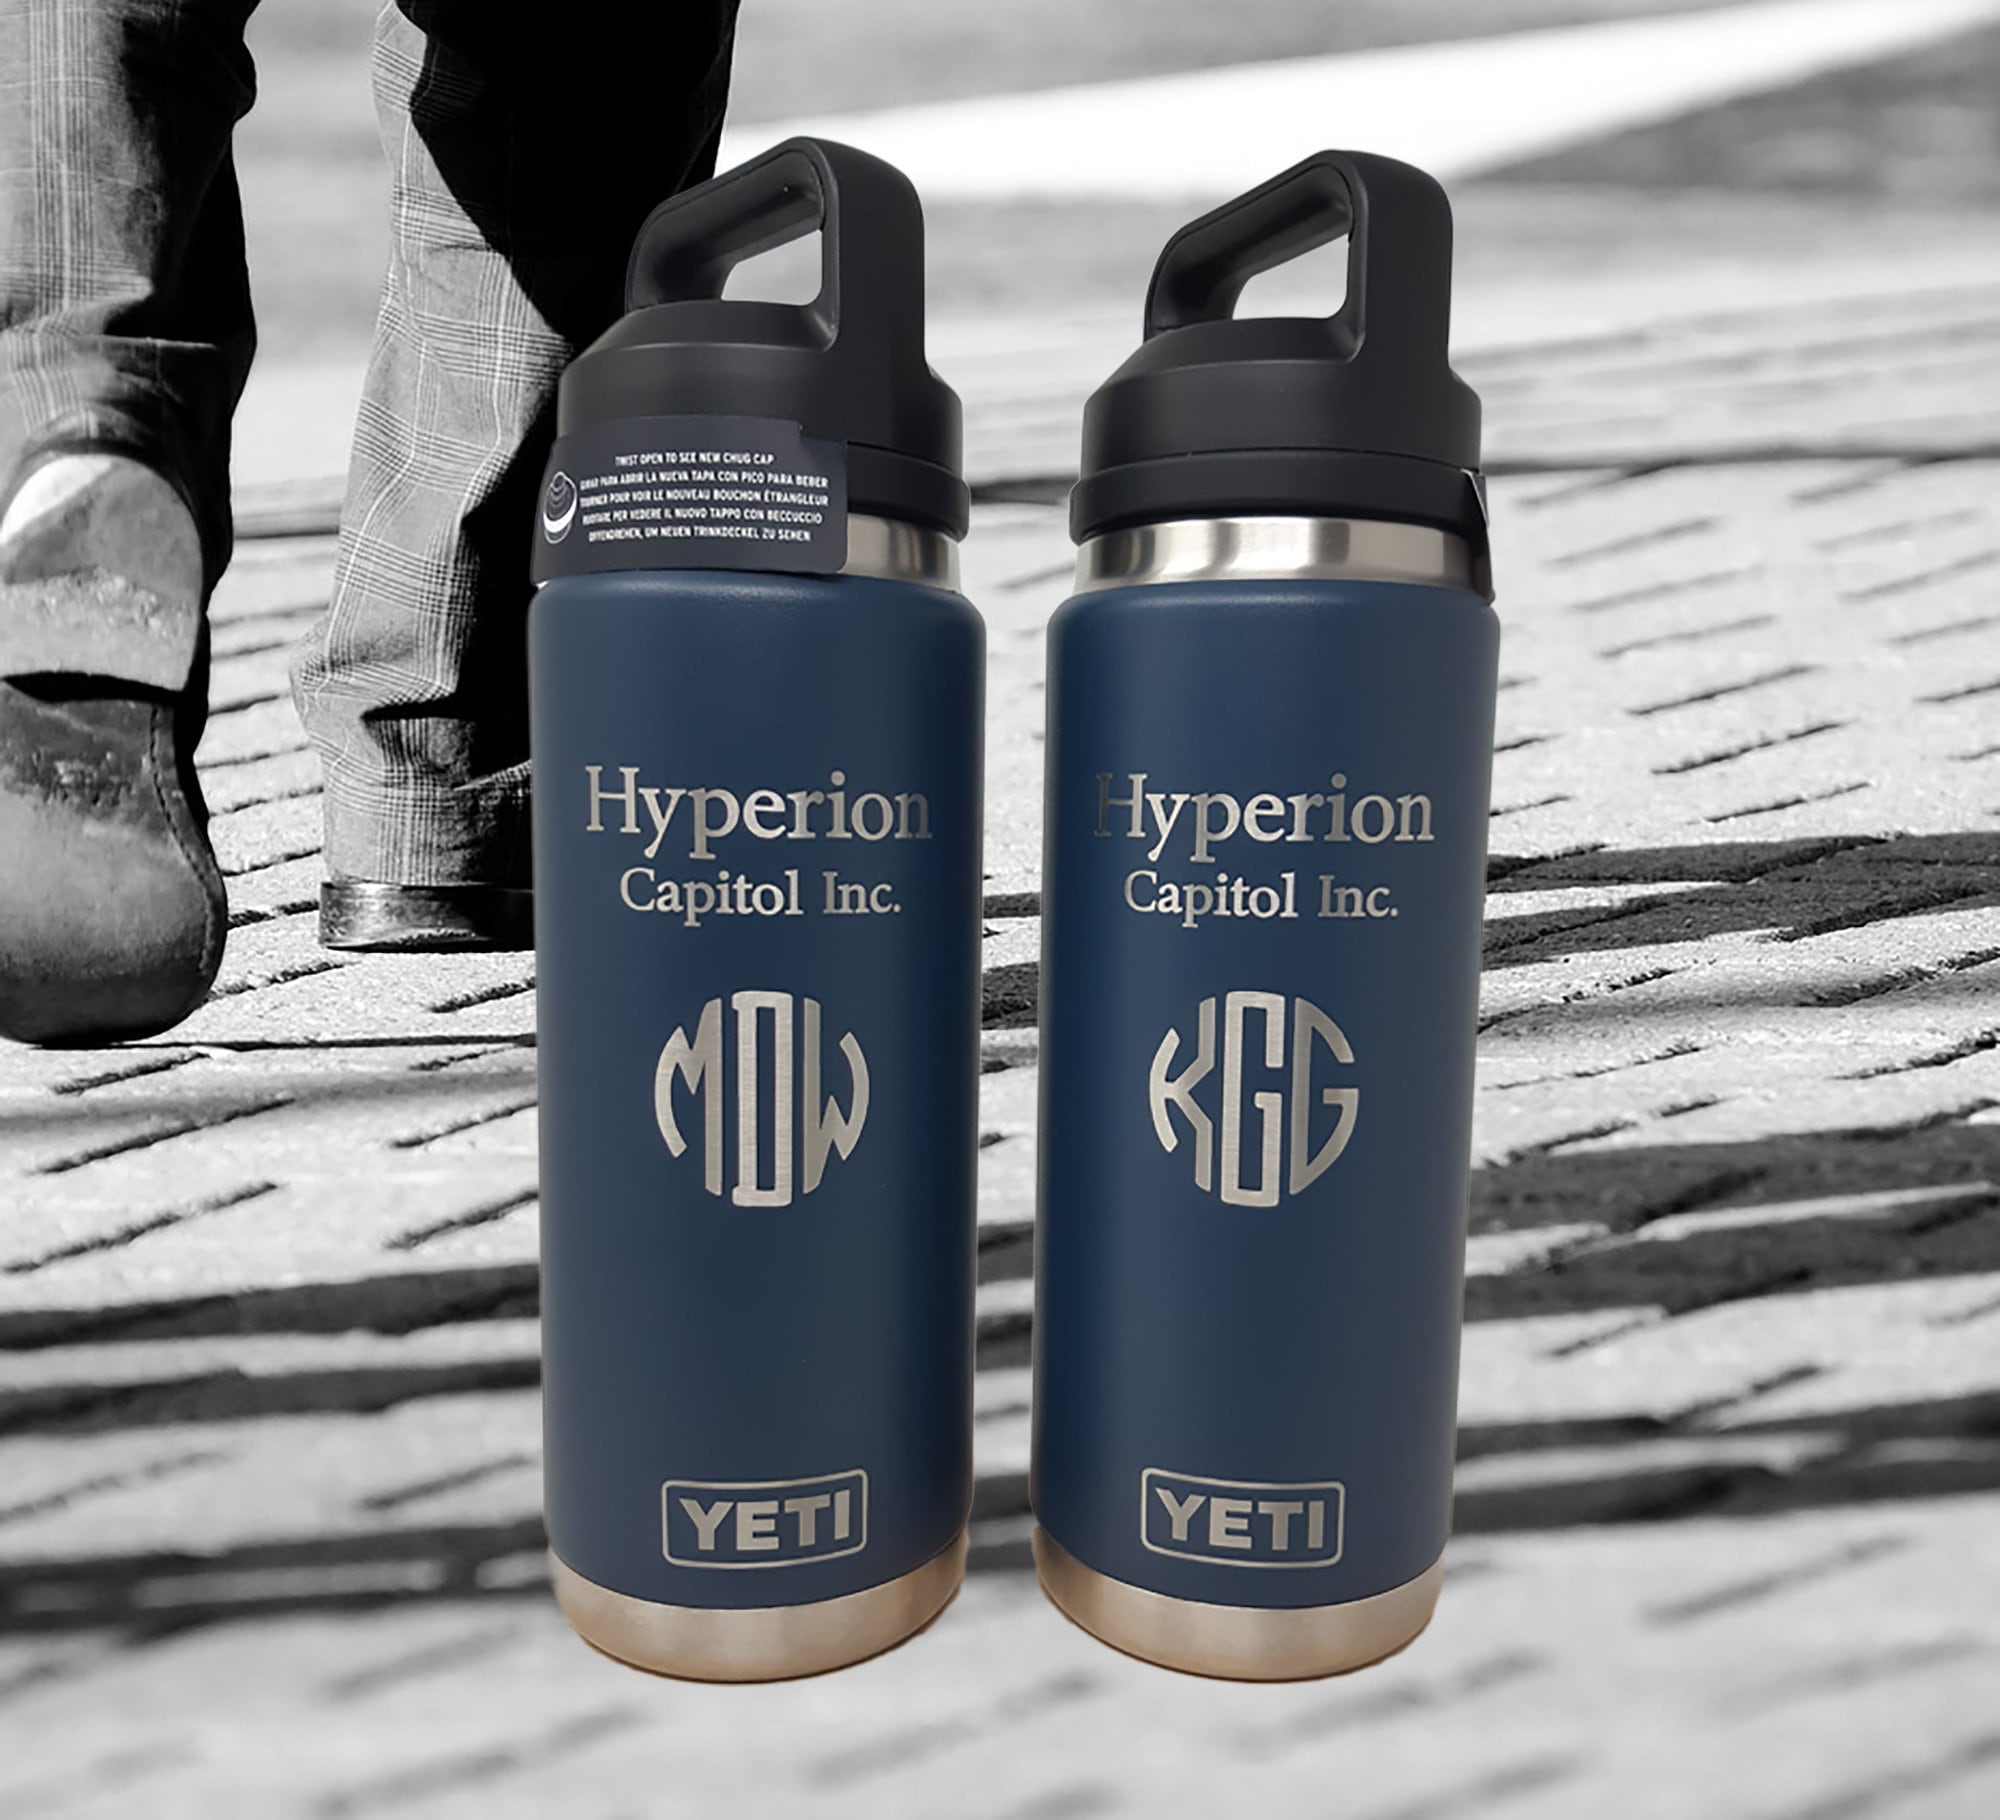 REAL YETI 16 Oz. Laser Engraved Nordic Blue Stainless Steel Yeti Stackable  Pint Rambler Personalized Vacuum Insulated YETI 